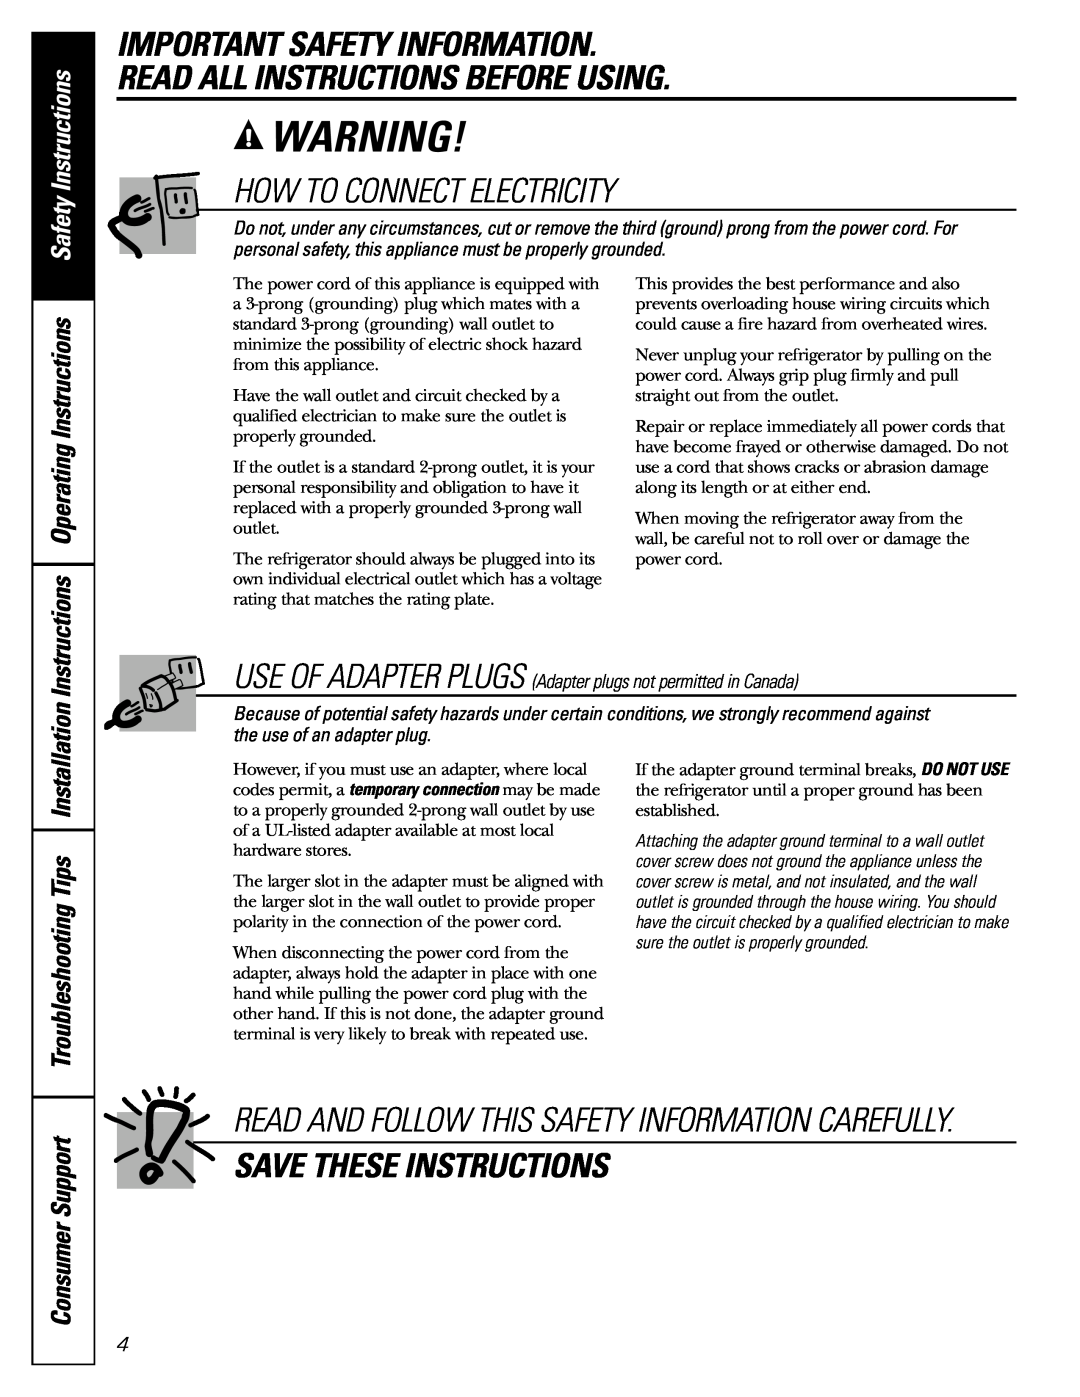 GE 20, 25 How To Connect Electricity, Save These Instructions, Troubleshooting Tips, Consumer Support, Safety Instructions 